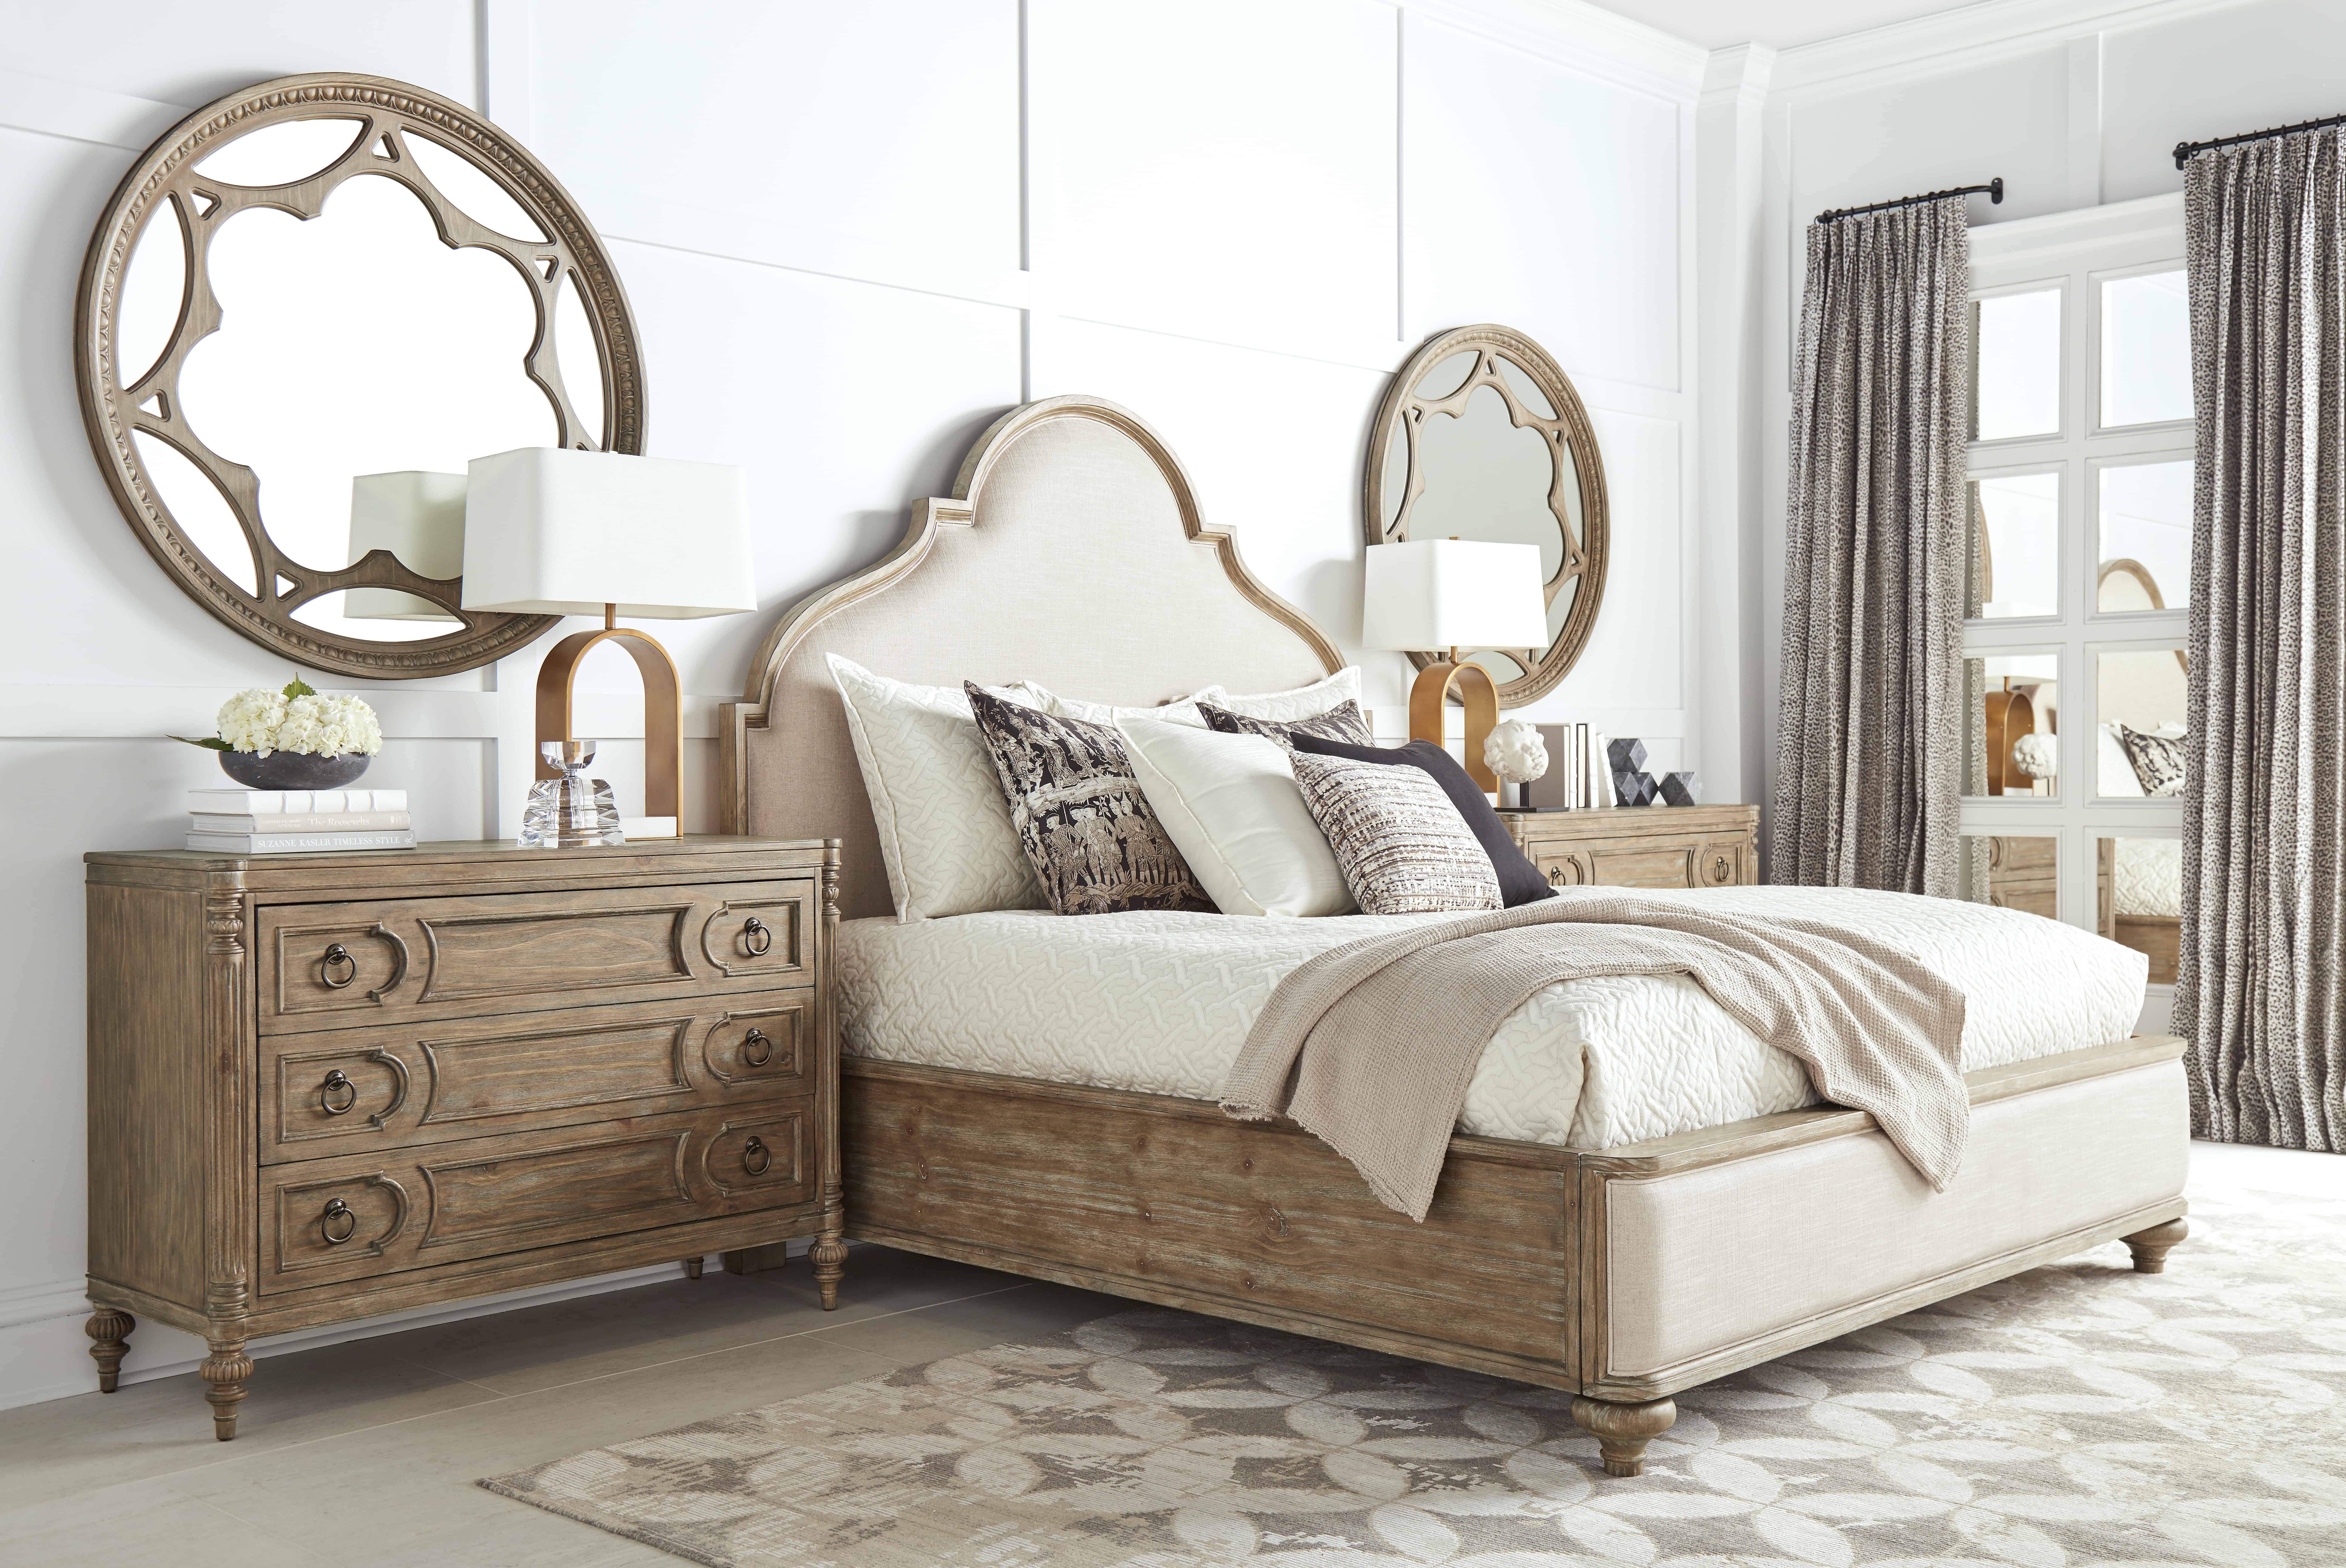 Modern Style Fabric Queen Bed Frame French Style Bedroom Furniture